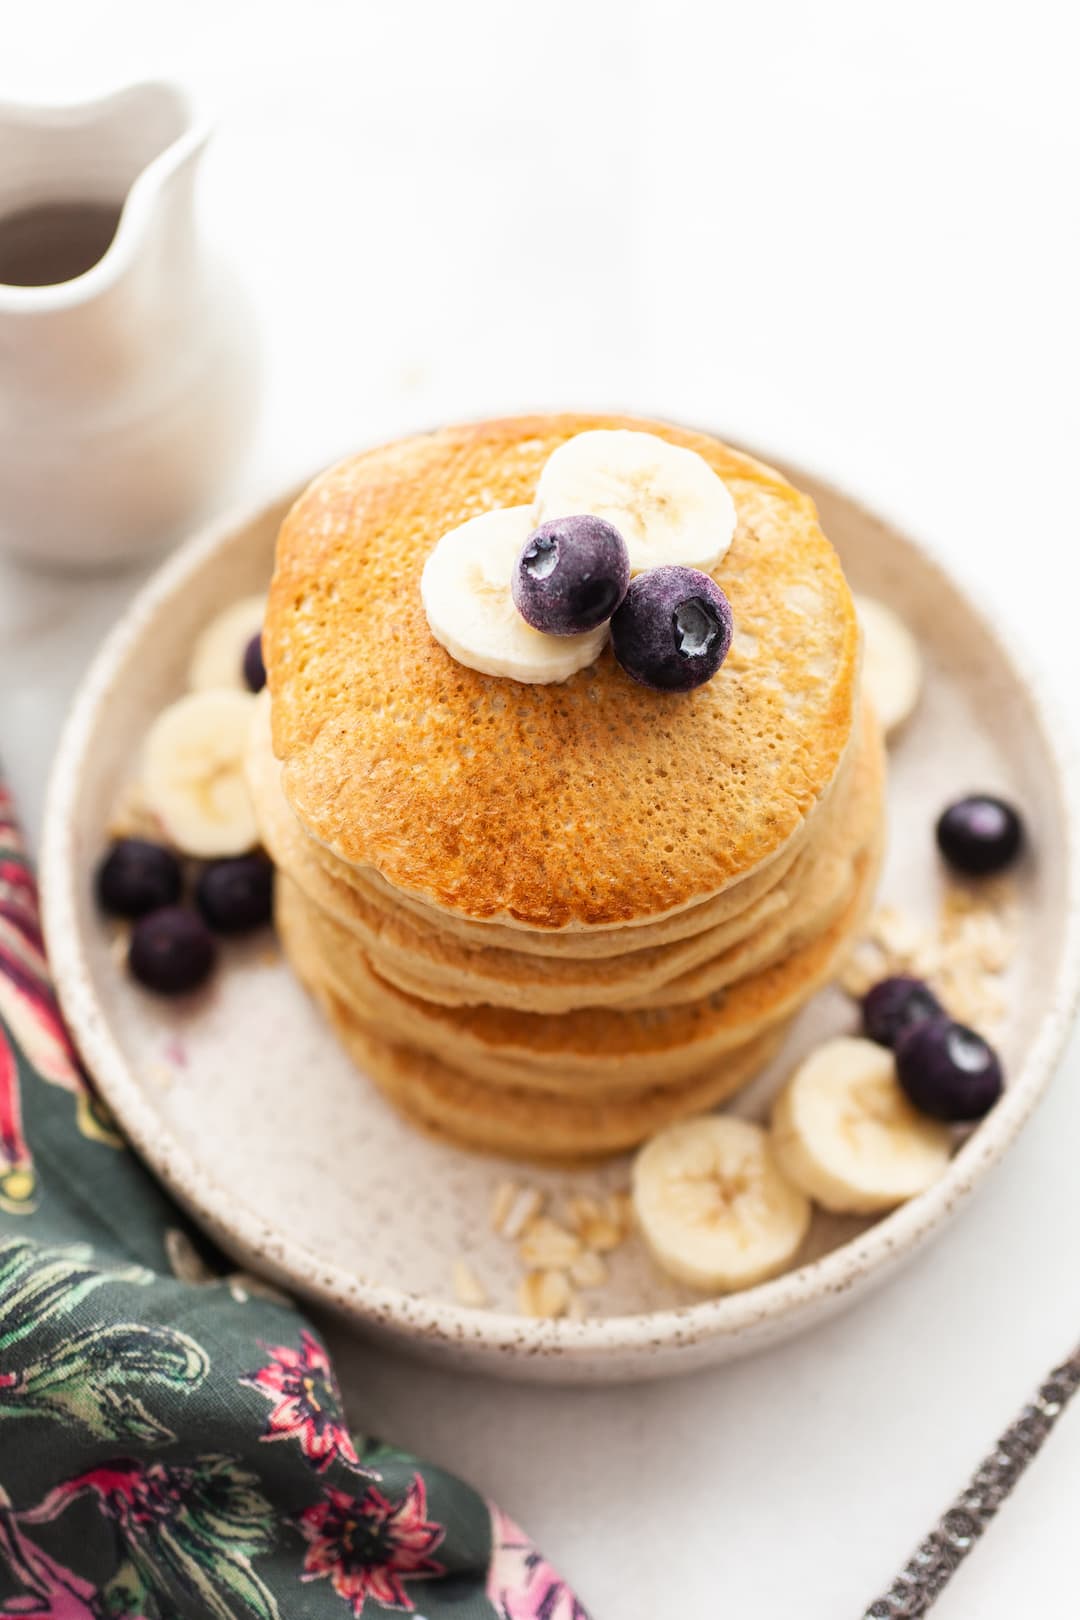 image of a stack of Fluffy Oat Flour Pancakes with blueberries and banana slices on top